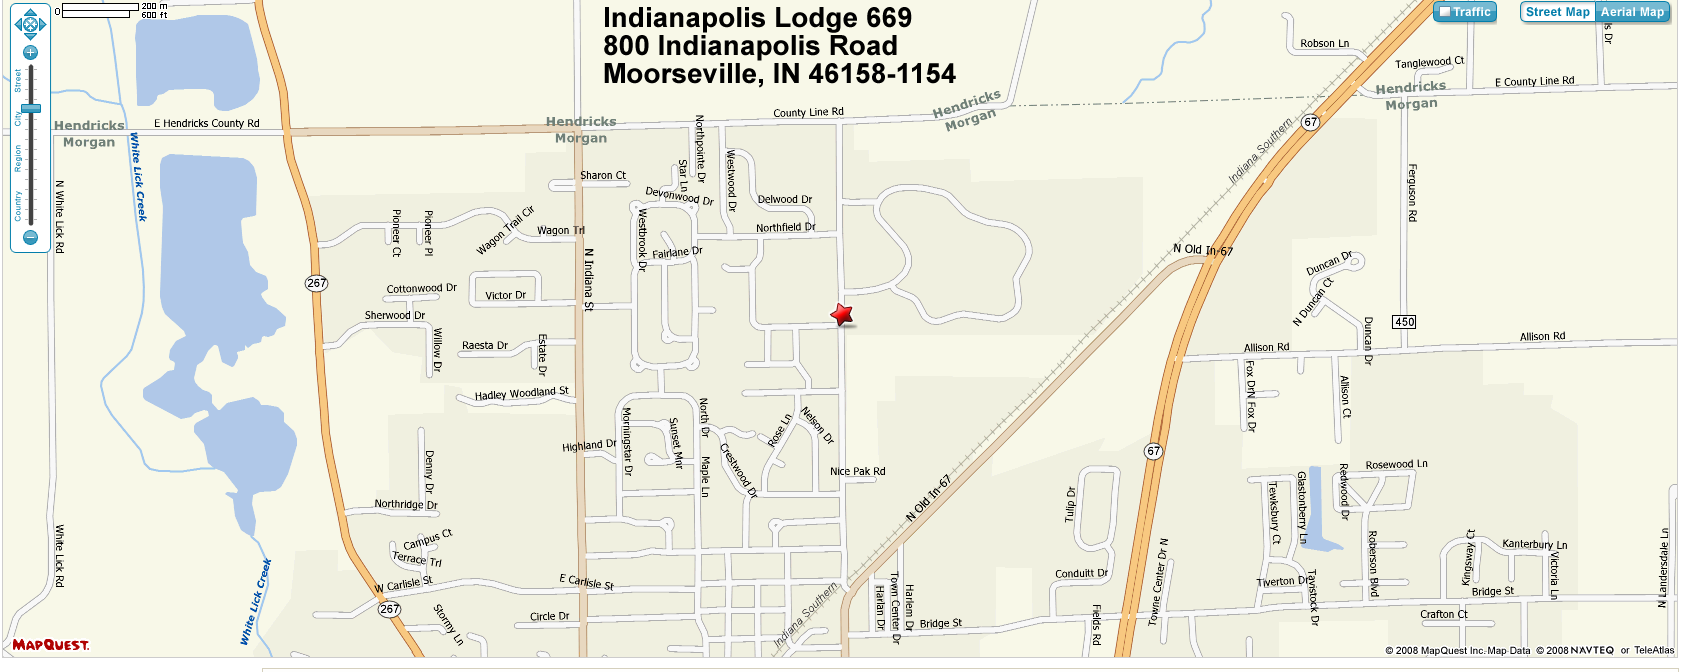 Click for MapQuest page for Indianapolis Lodge 669